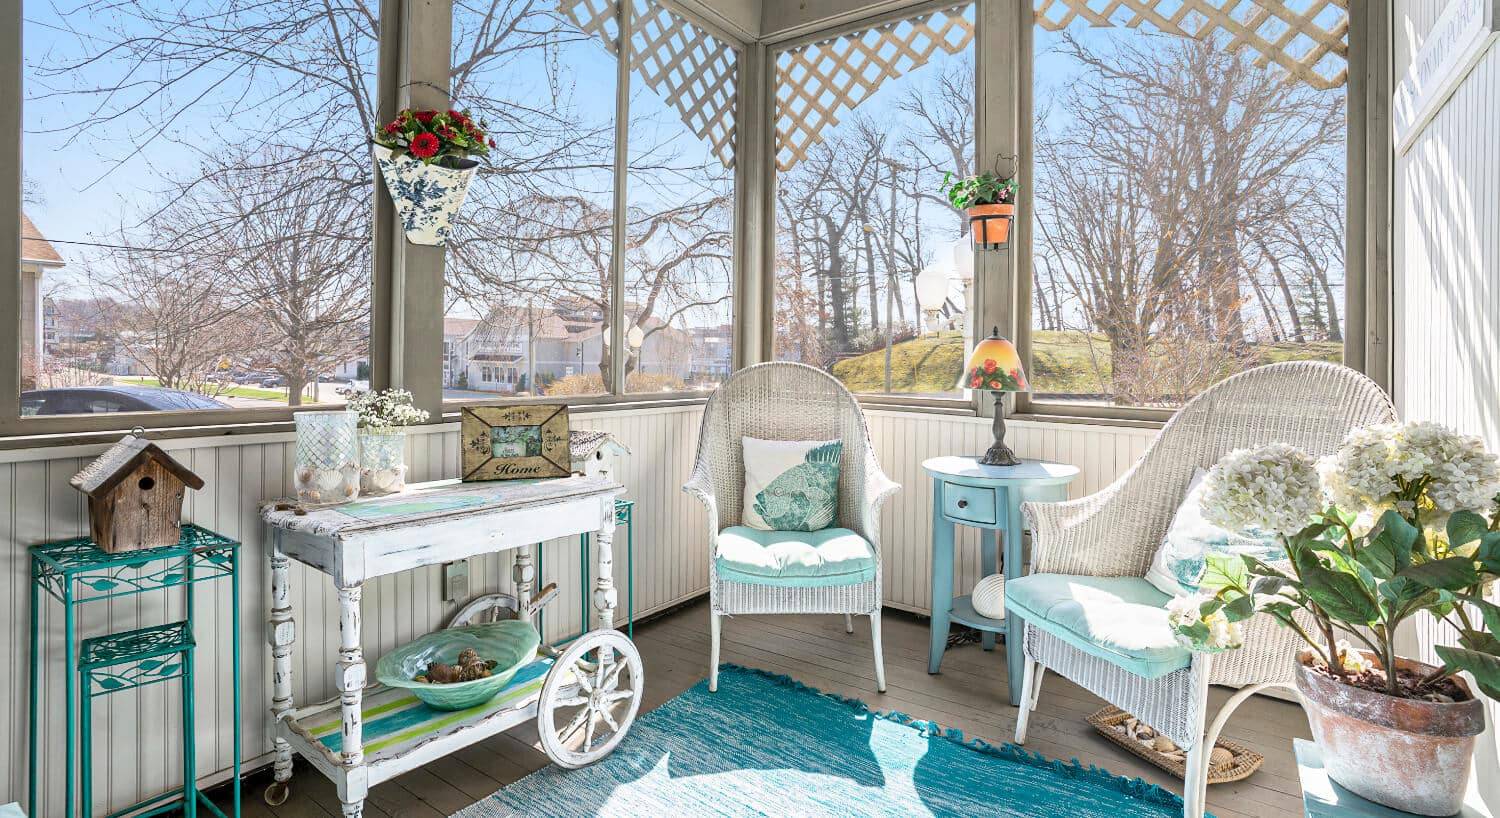 A screened in porch with white wicker furniture, wood floors, a blue area rug, along with pots of flowers.